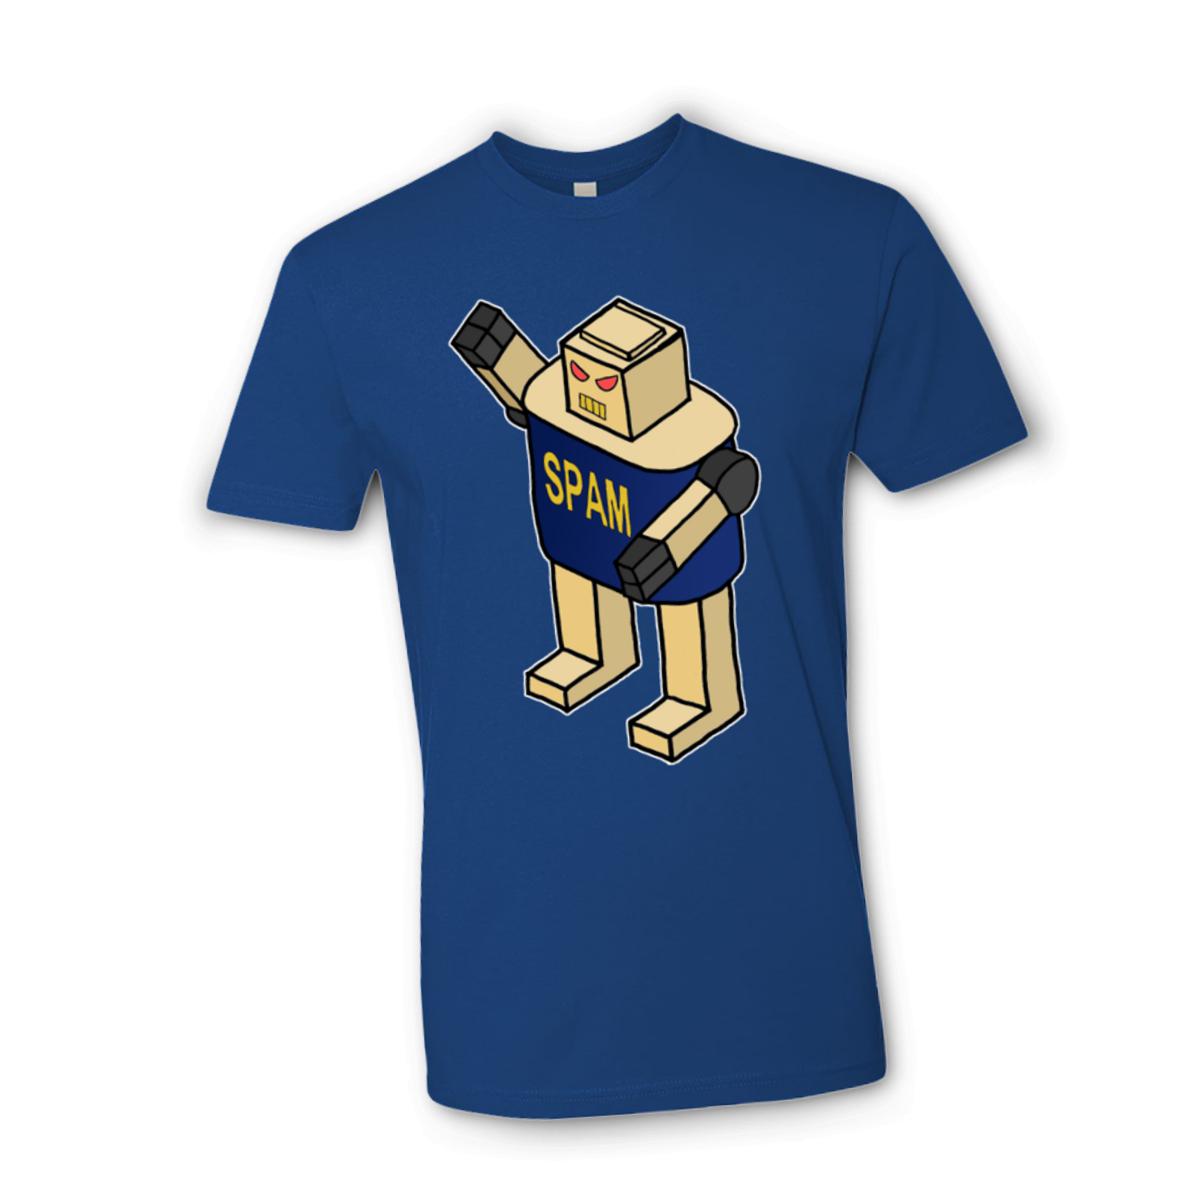 Spam Bot Unisex Tee Small royal-blue